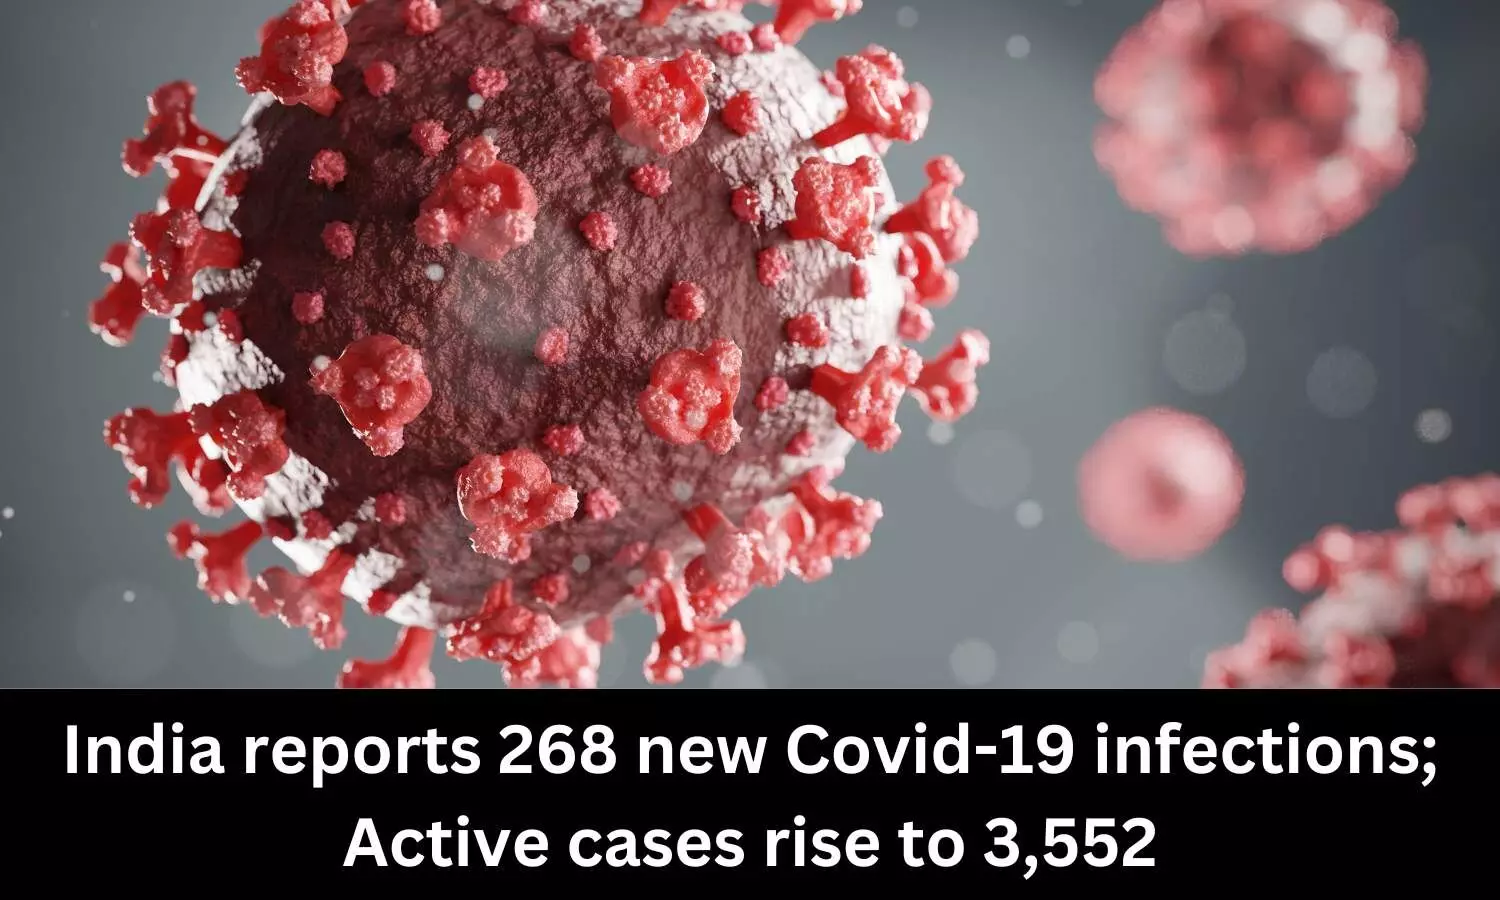 India reports 268 new Covid-19 infections; active cases rise to 3,552